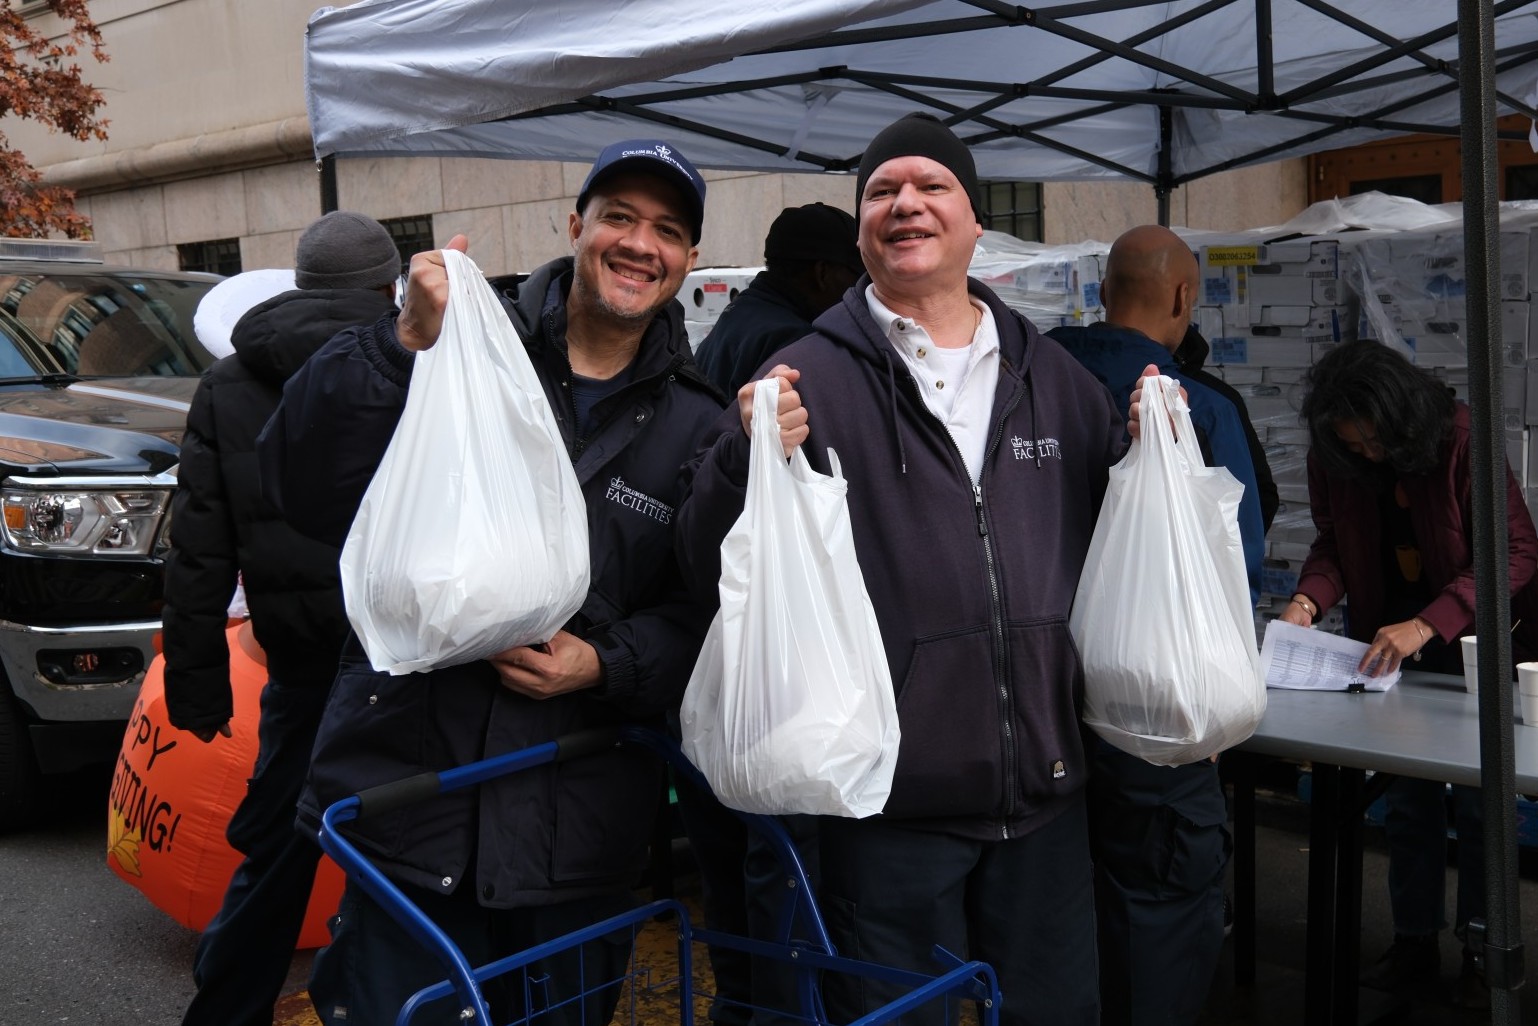 Facilities and Operations employees picking up their turkeys